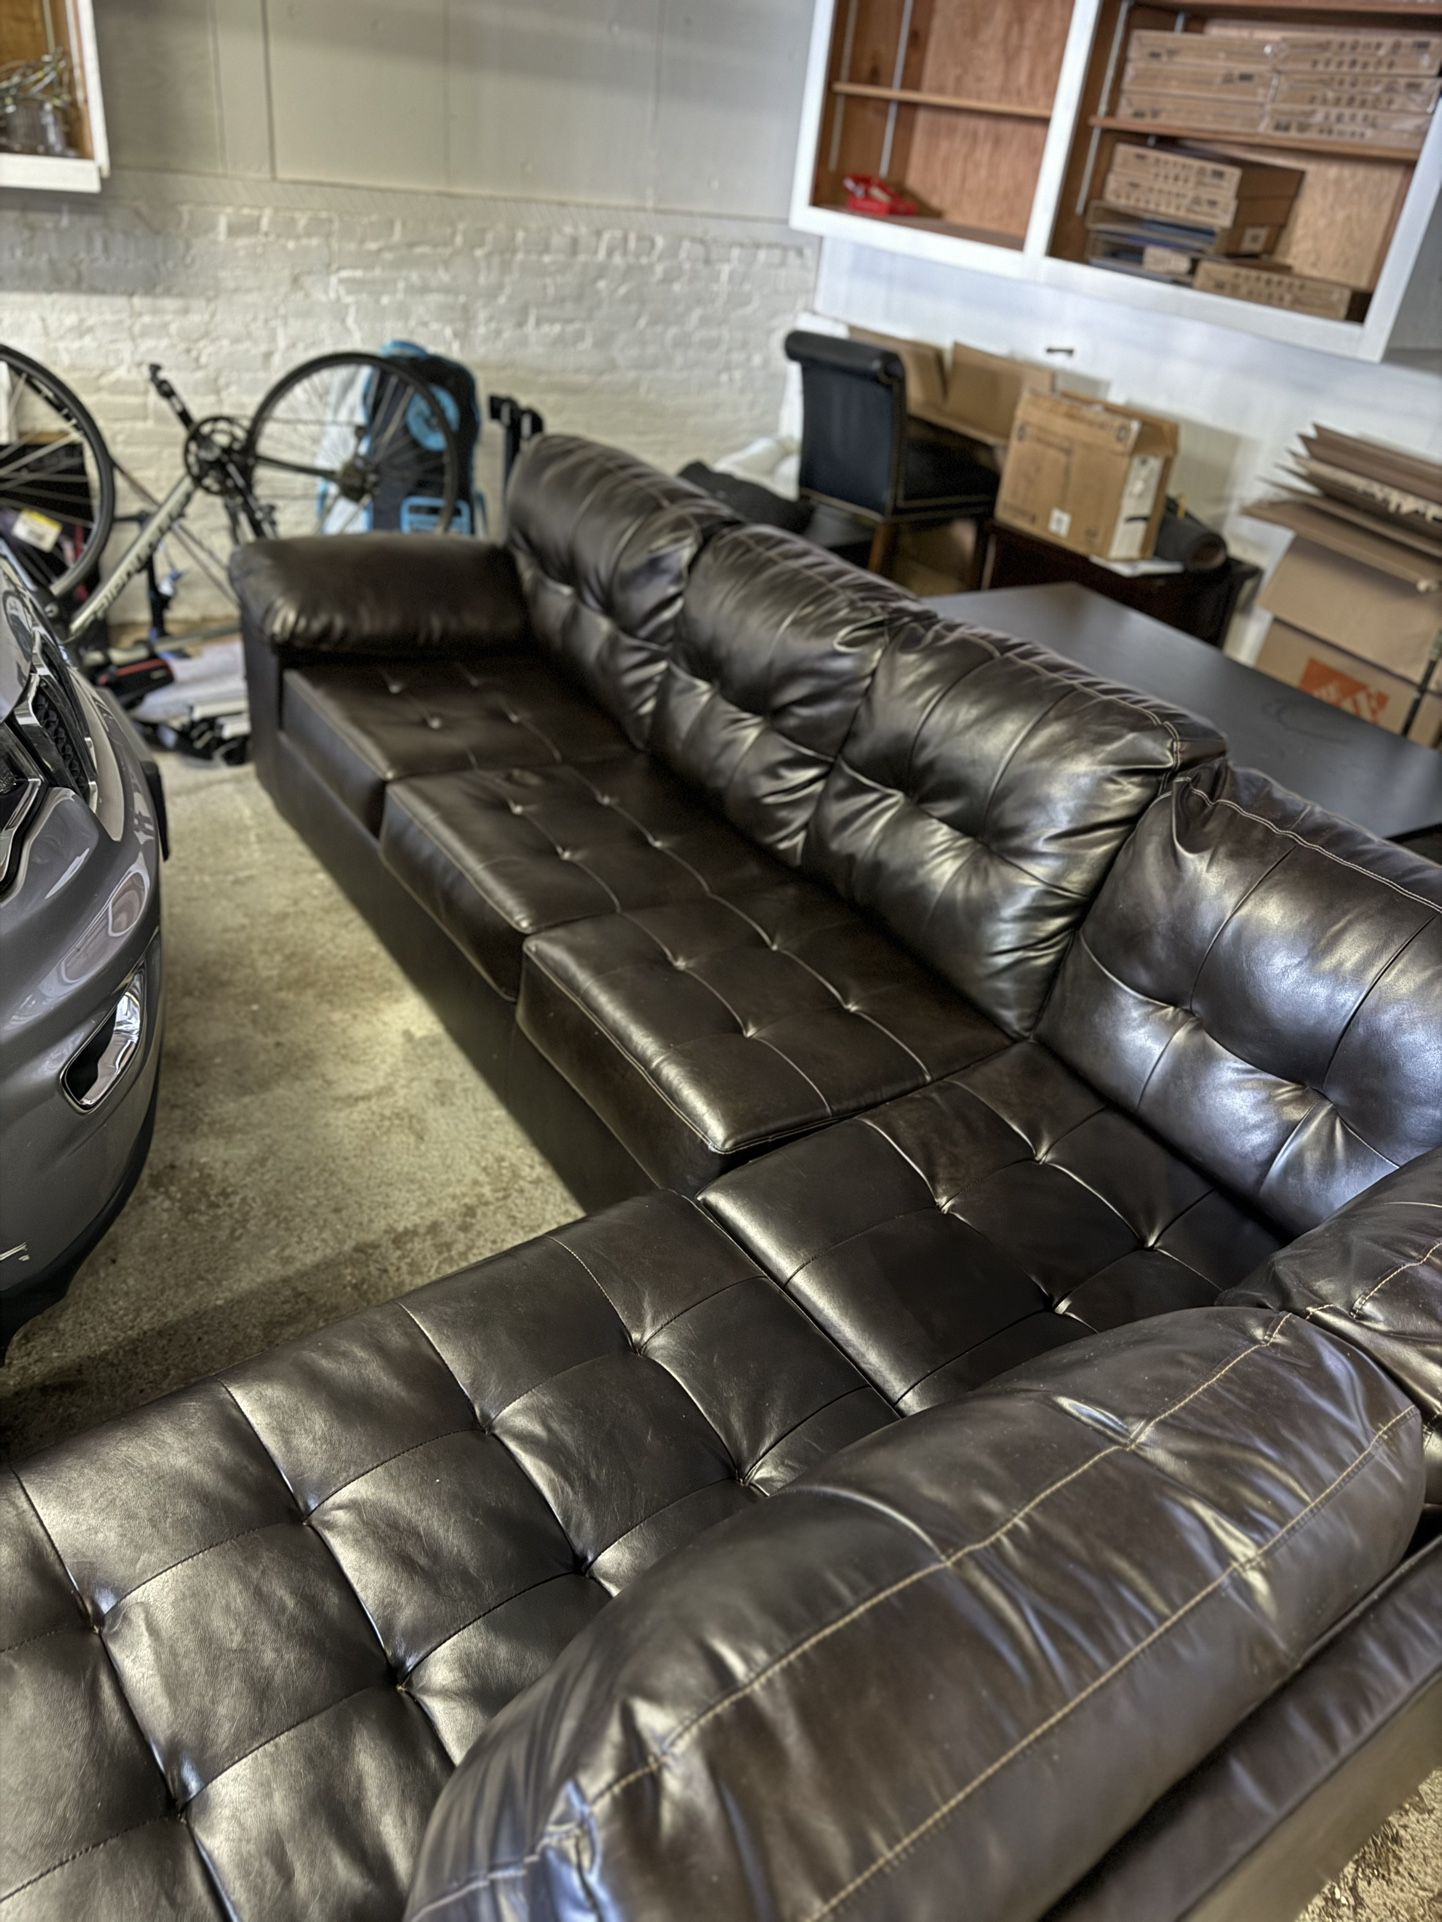 Black Leather Sectional Couch - $200